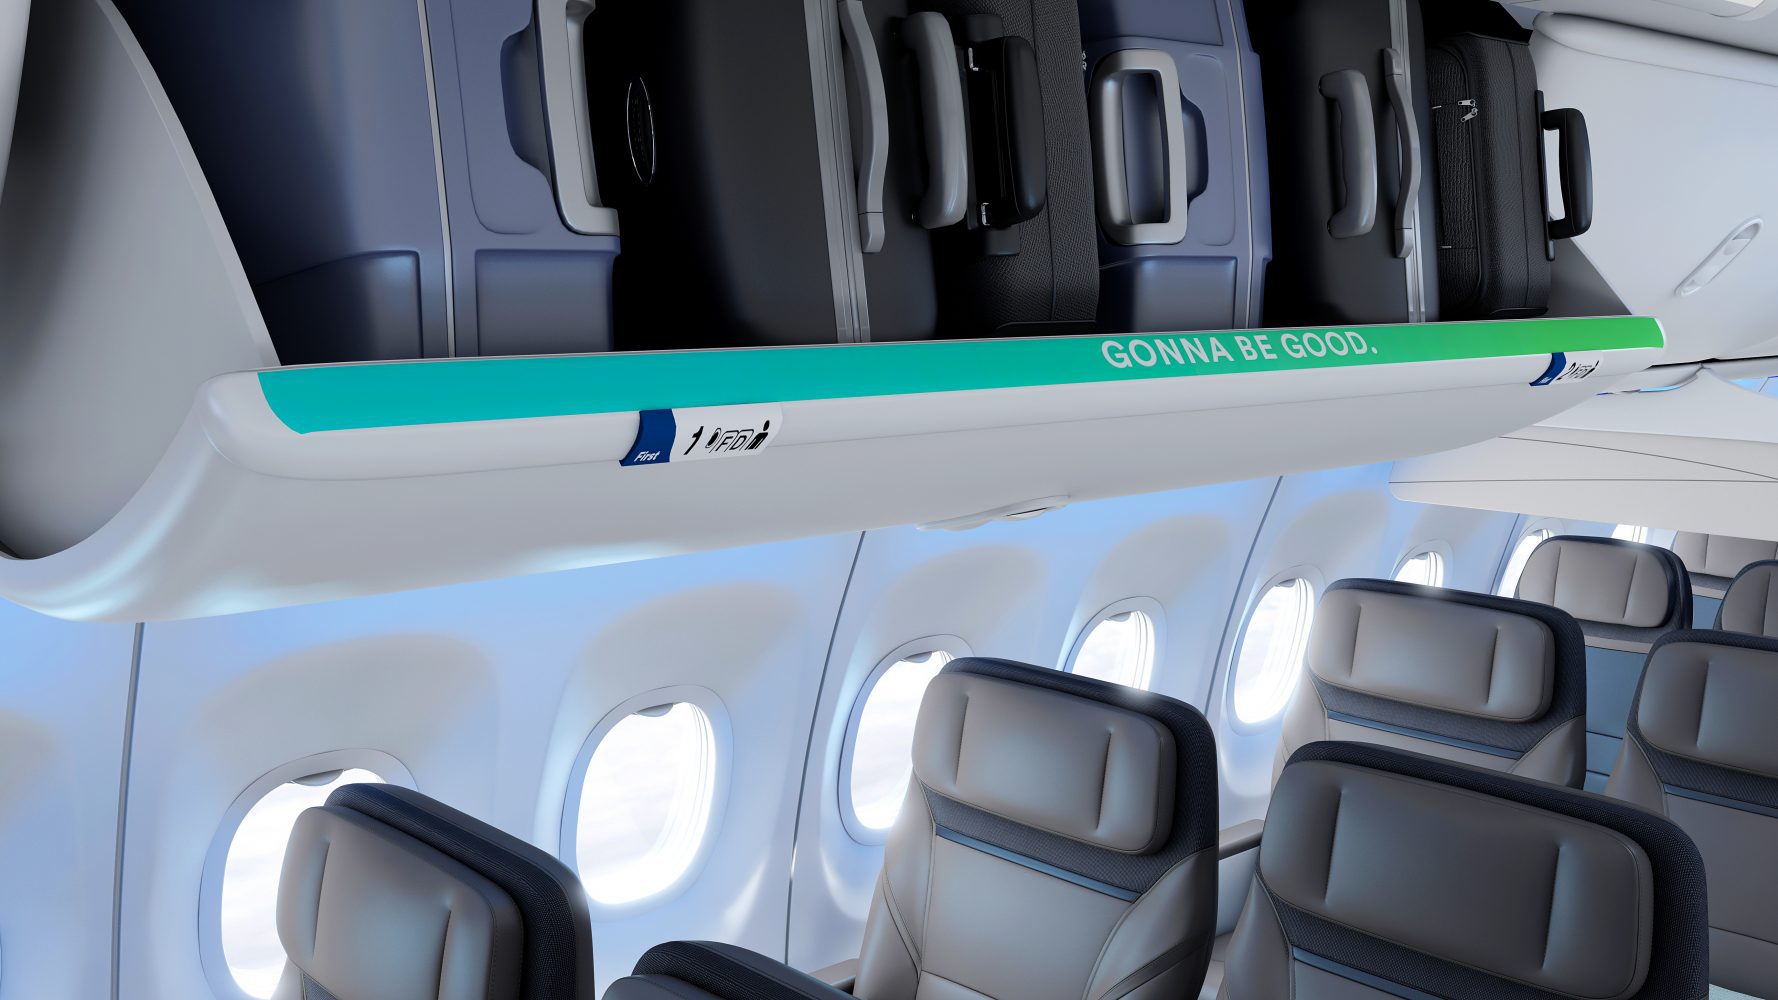 I can appreciate the new branding (Image: Alaska Airlines)